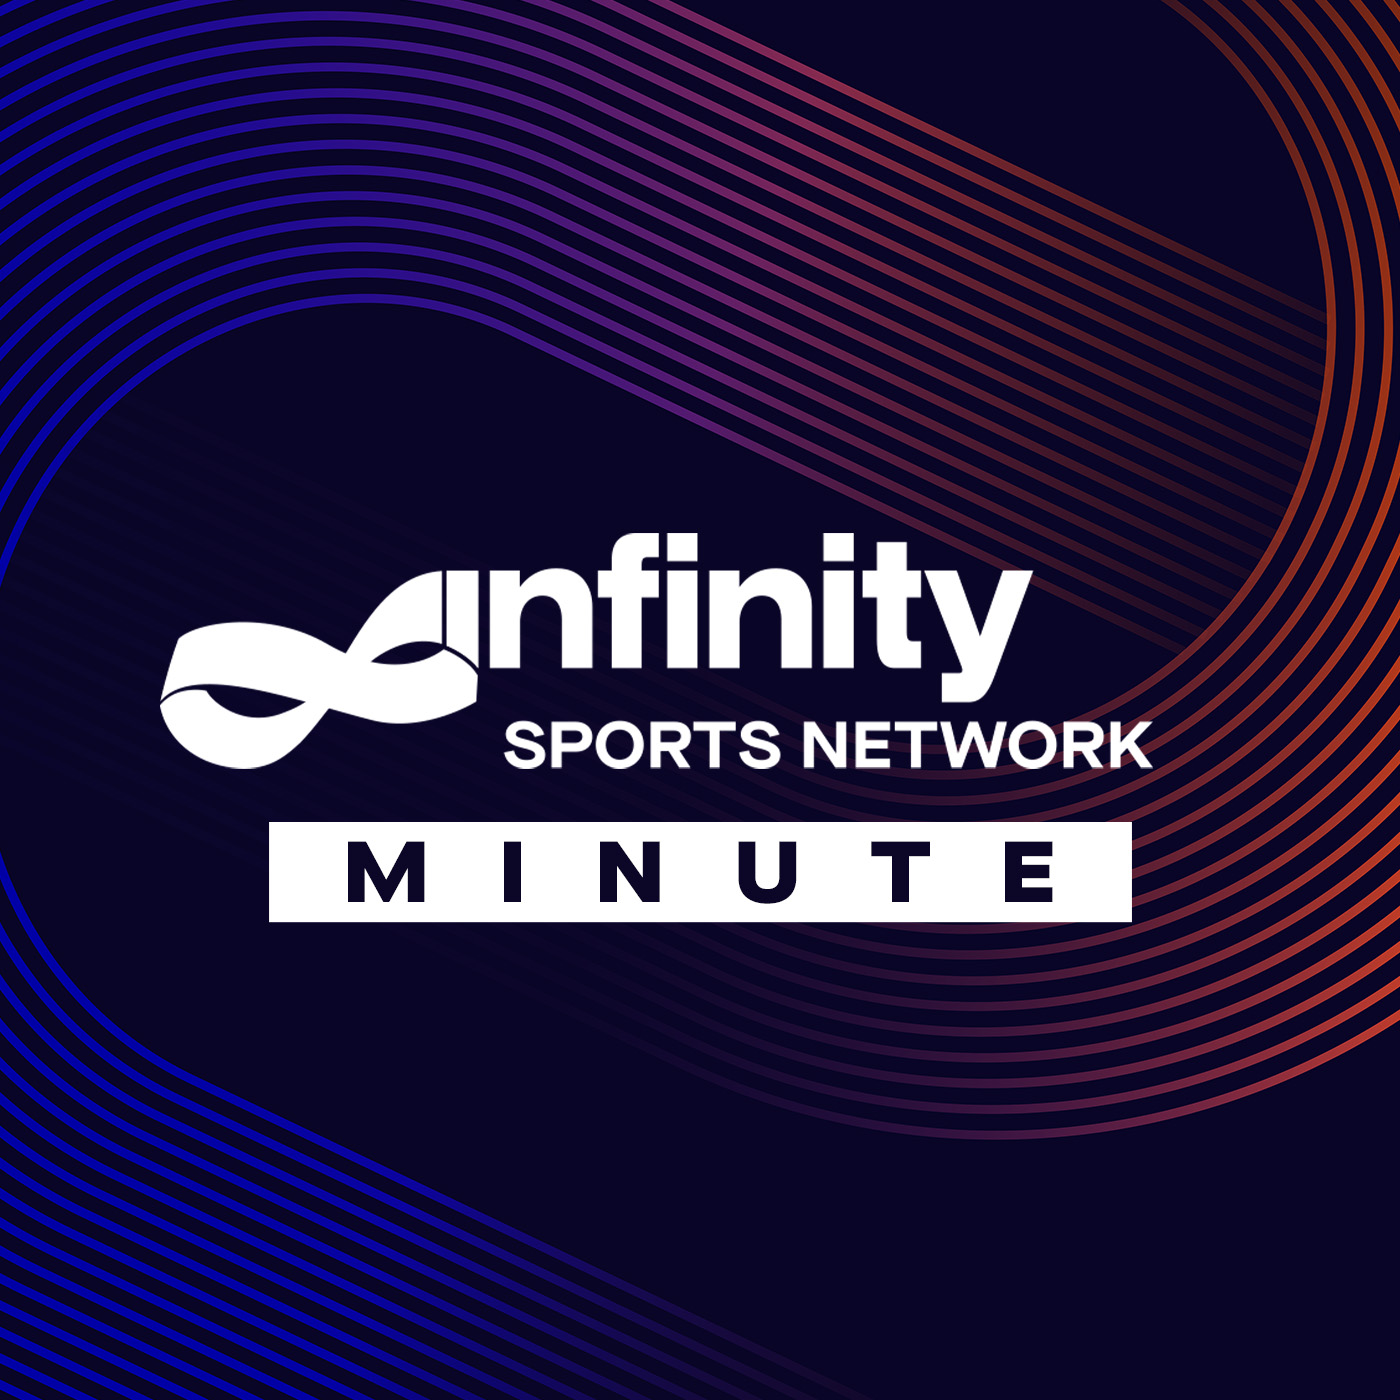 7-25 JR Sport Brief Sports Minute on Mike Trout